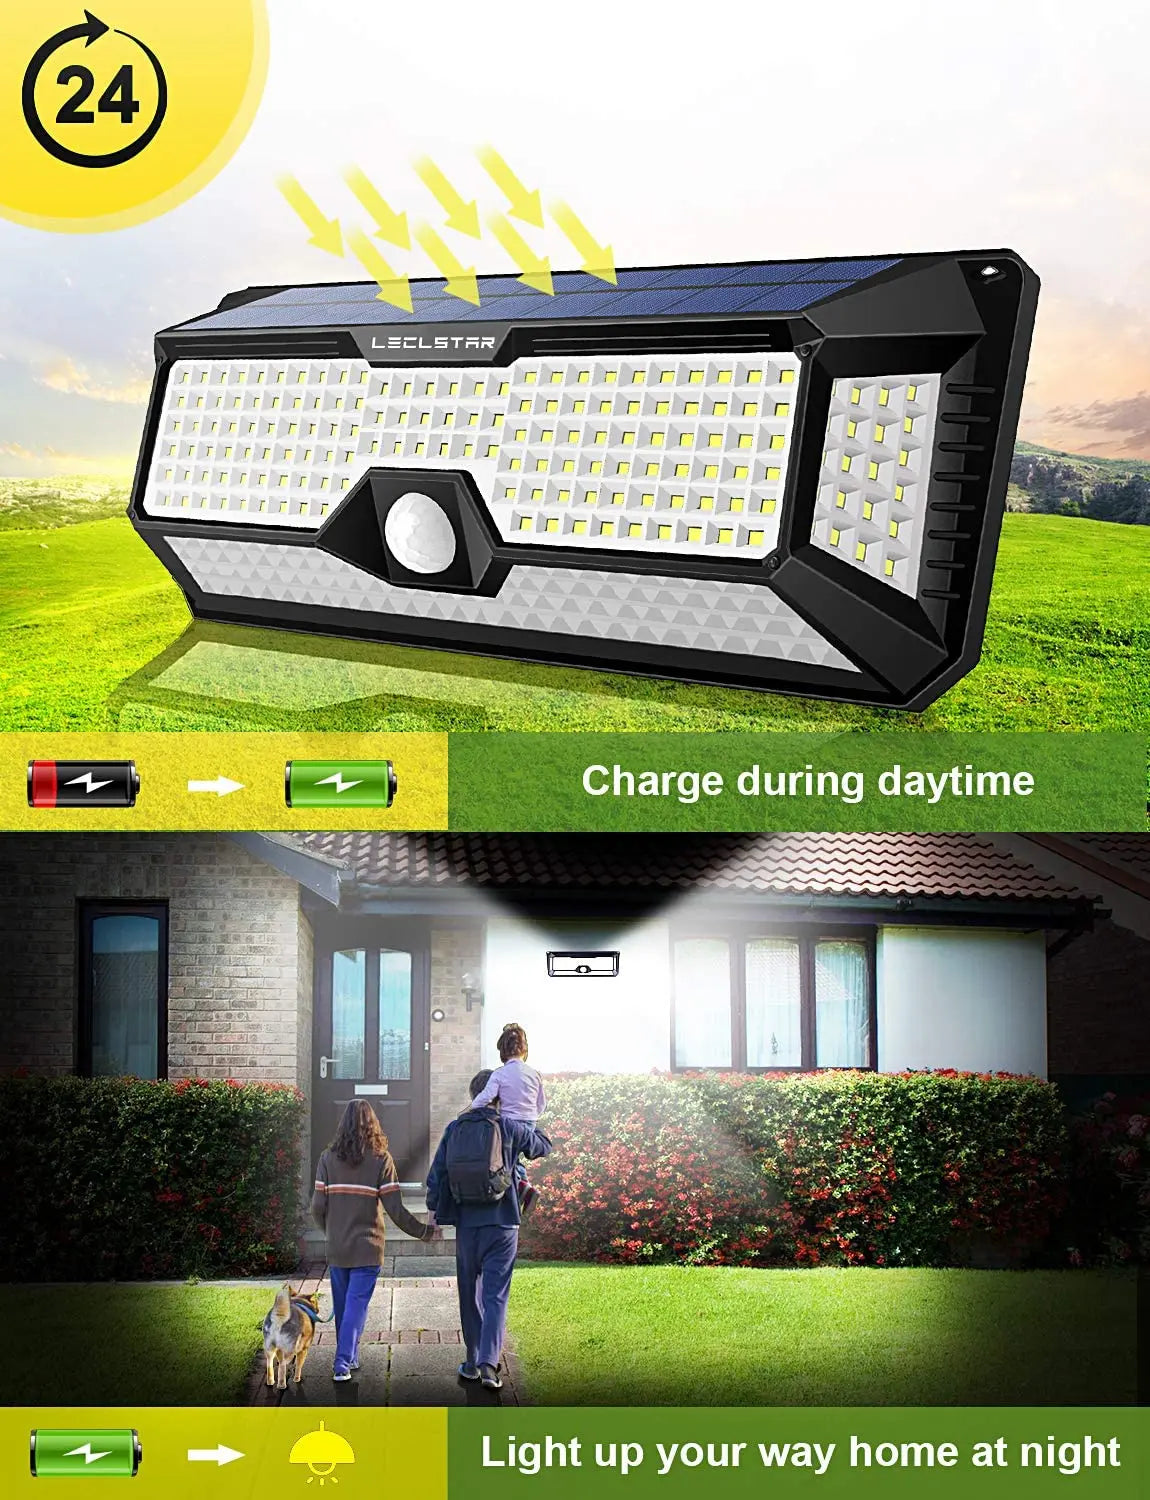 268 LED Reflector Solar Power Patio Light, Charges via solar power during the day, then illuminates your pathway in the evening.